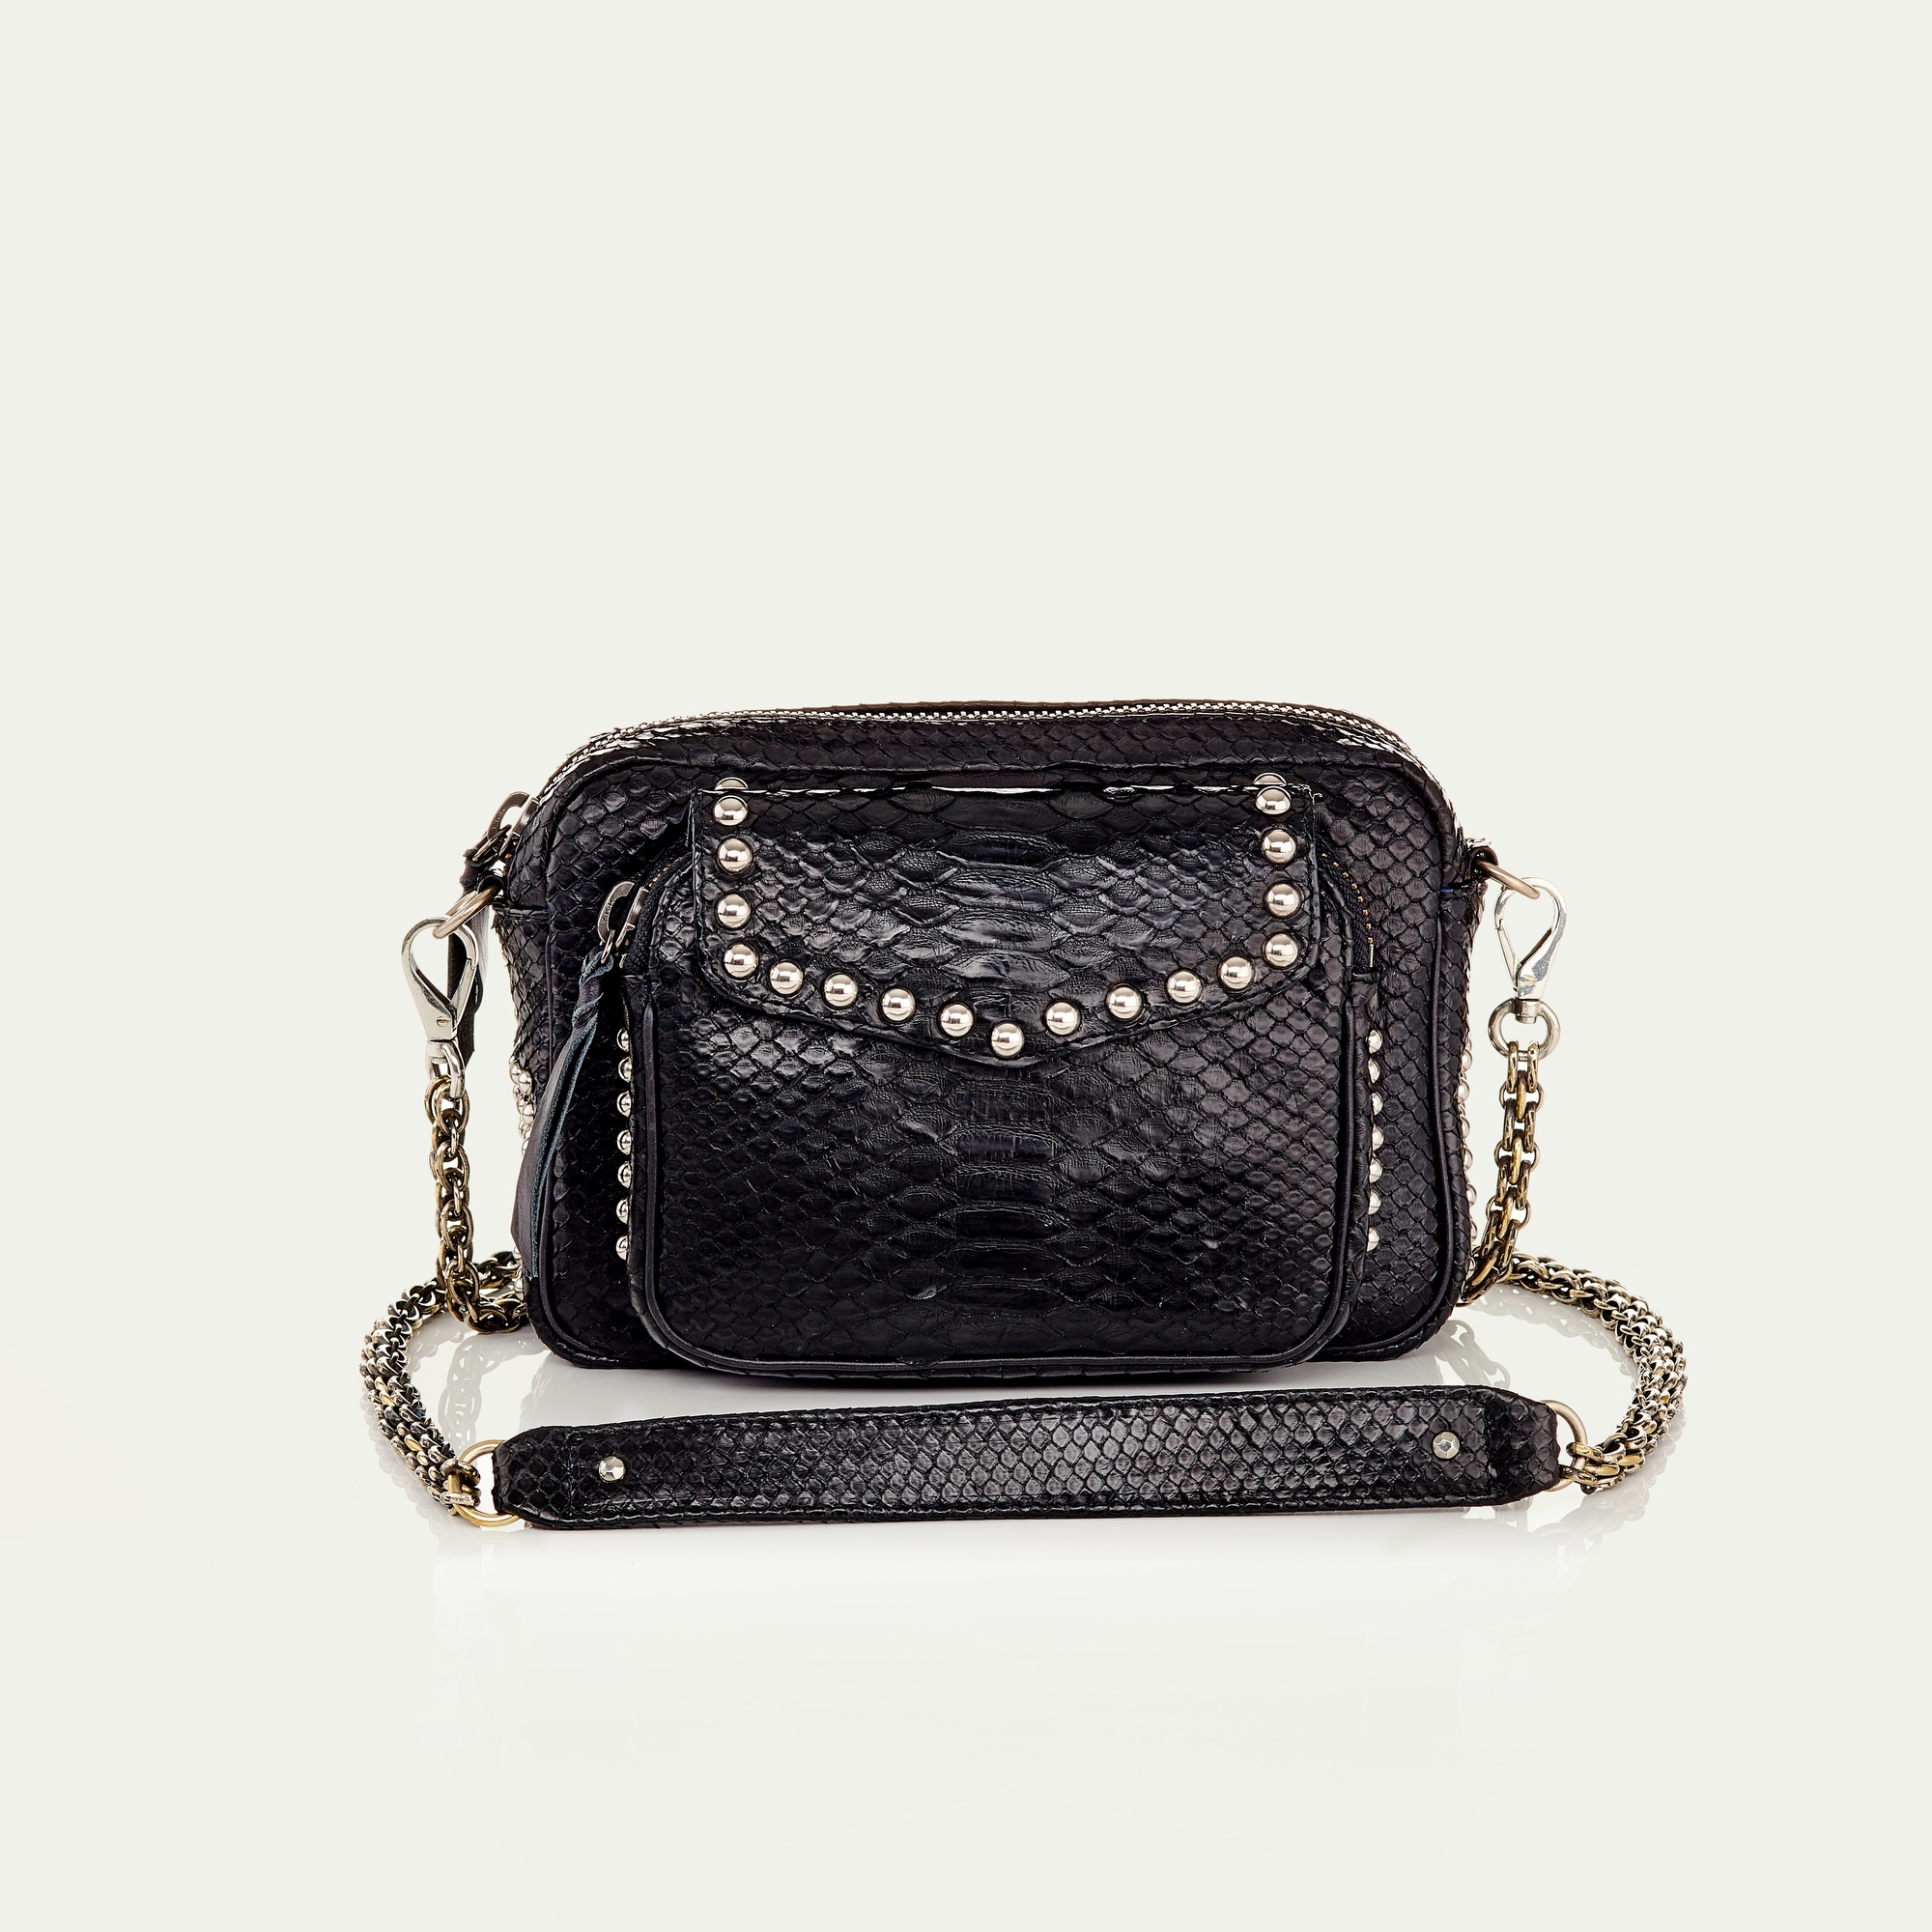 Details about   Valentino Pearl Studded Clutch/Sling Purse w/ Tassel Black